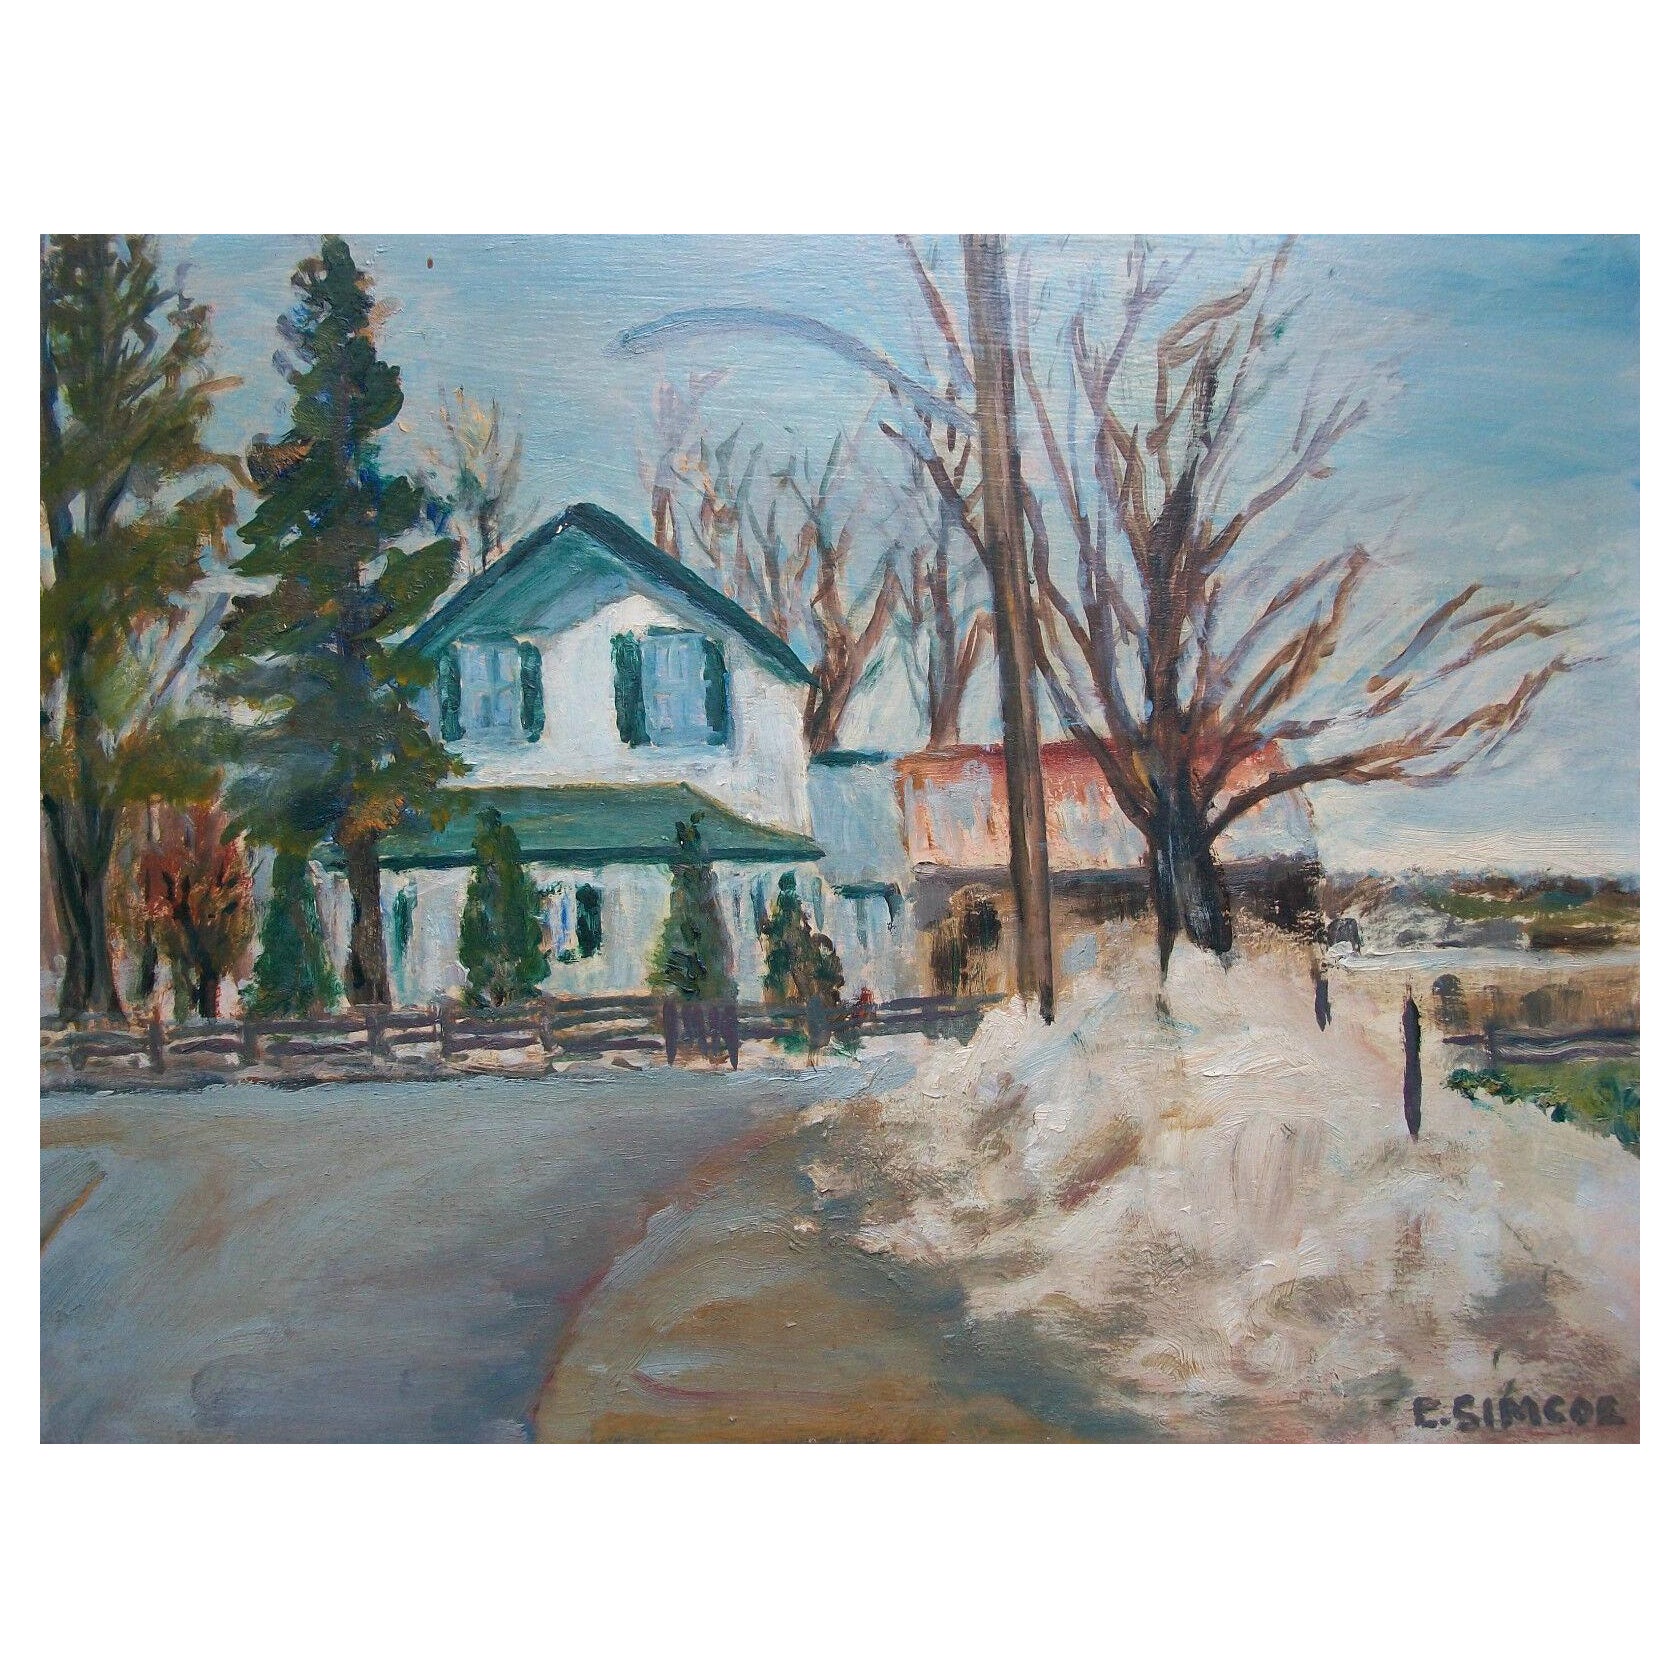 E. SIMCOE - Vintage Oil Painting on Panel - Unframed - Canada - Mid 20th Century For Sale